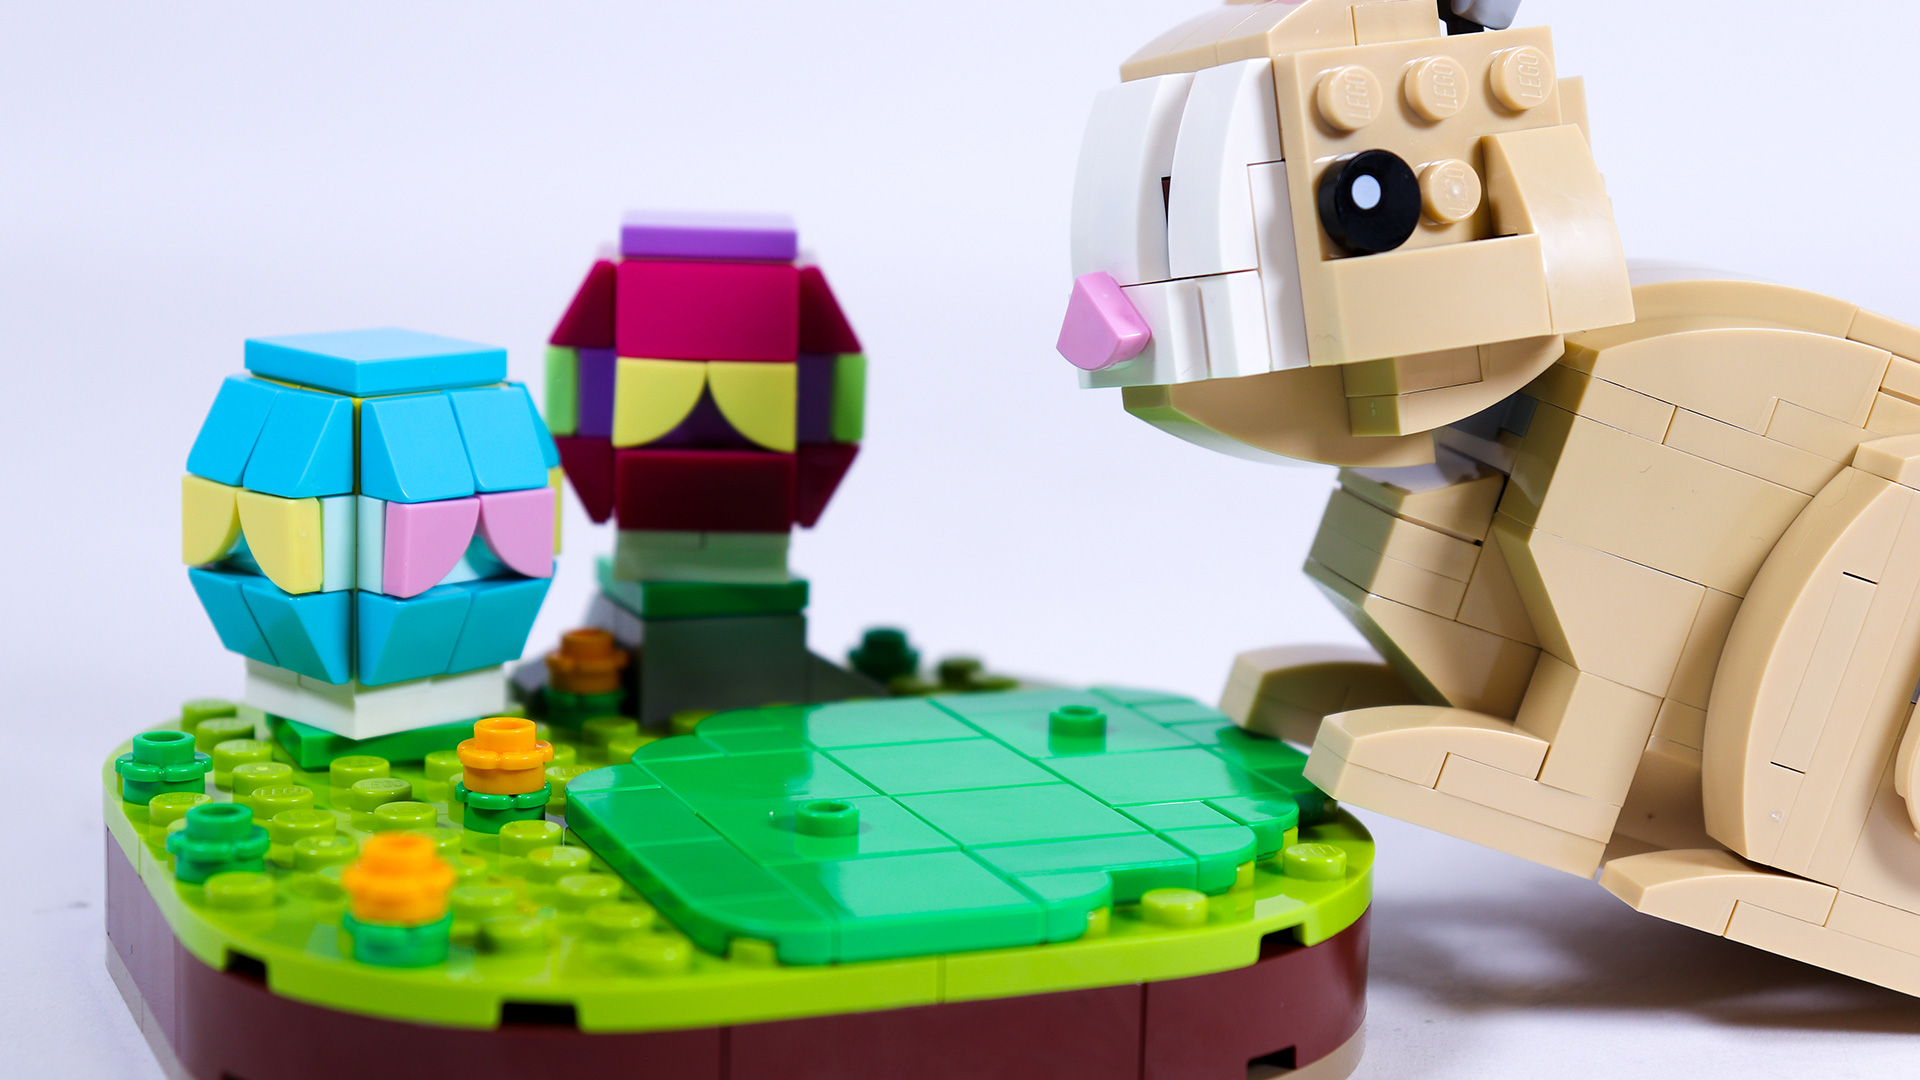 If you’re hunting for a special Easter treat, look no further. The cute LEGO® Easter Bunny (40463) has arrived! This lovable character, in a green meadow setting, comes with 2 customizable Easter eggs, posable head and ears and a hidden LEGO surprise. A fun way to wish kids, friends or family members a “Happy Easter